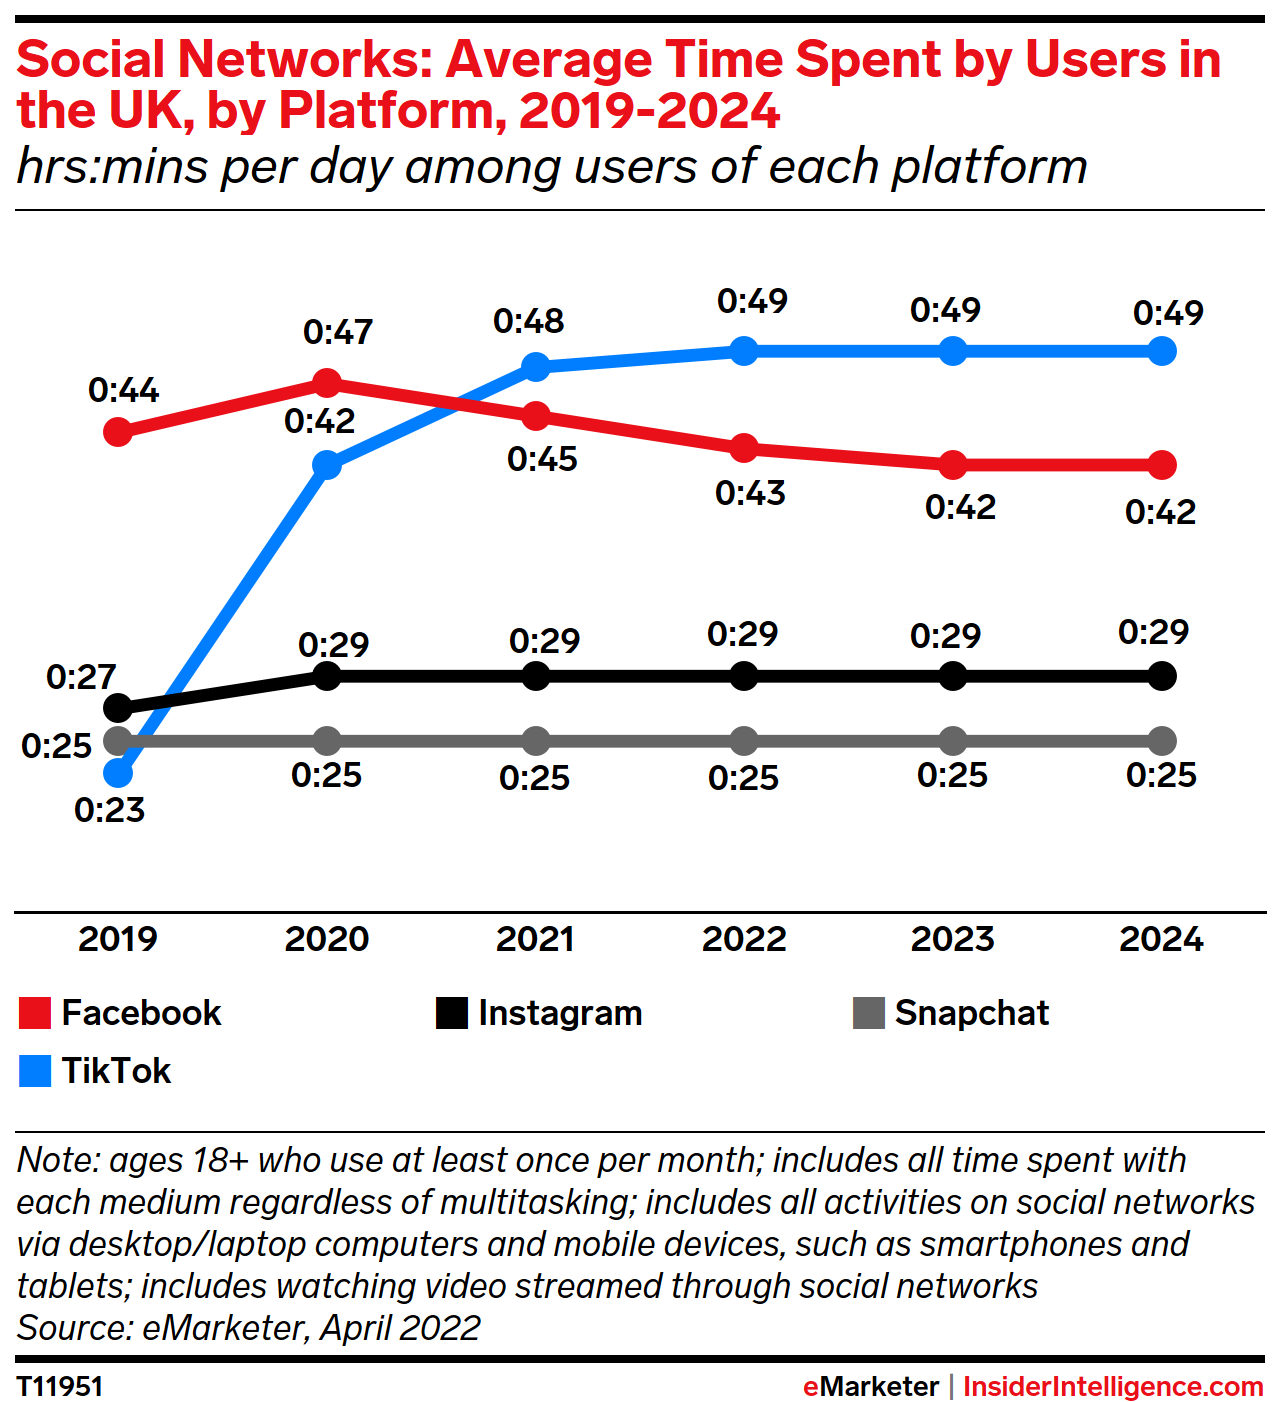 Social Networks: Average Time Spent by Users in the UK, by Platform, 2019-2024 (hrs:mins per day among users of each platform)